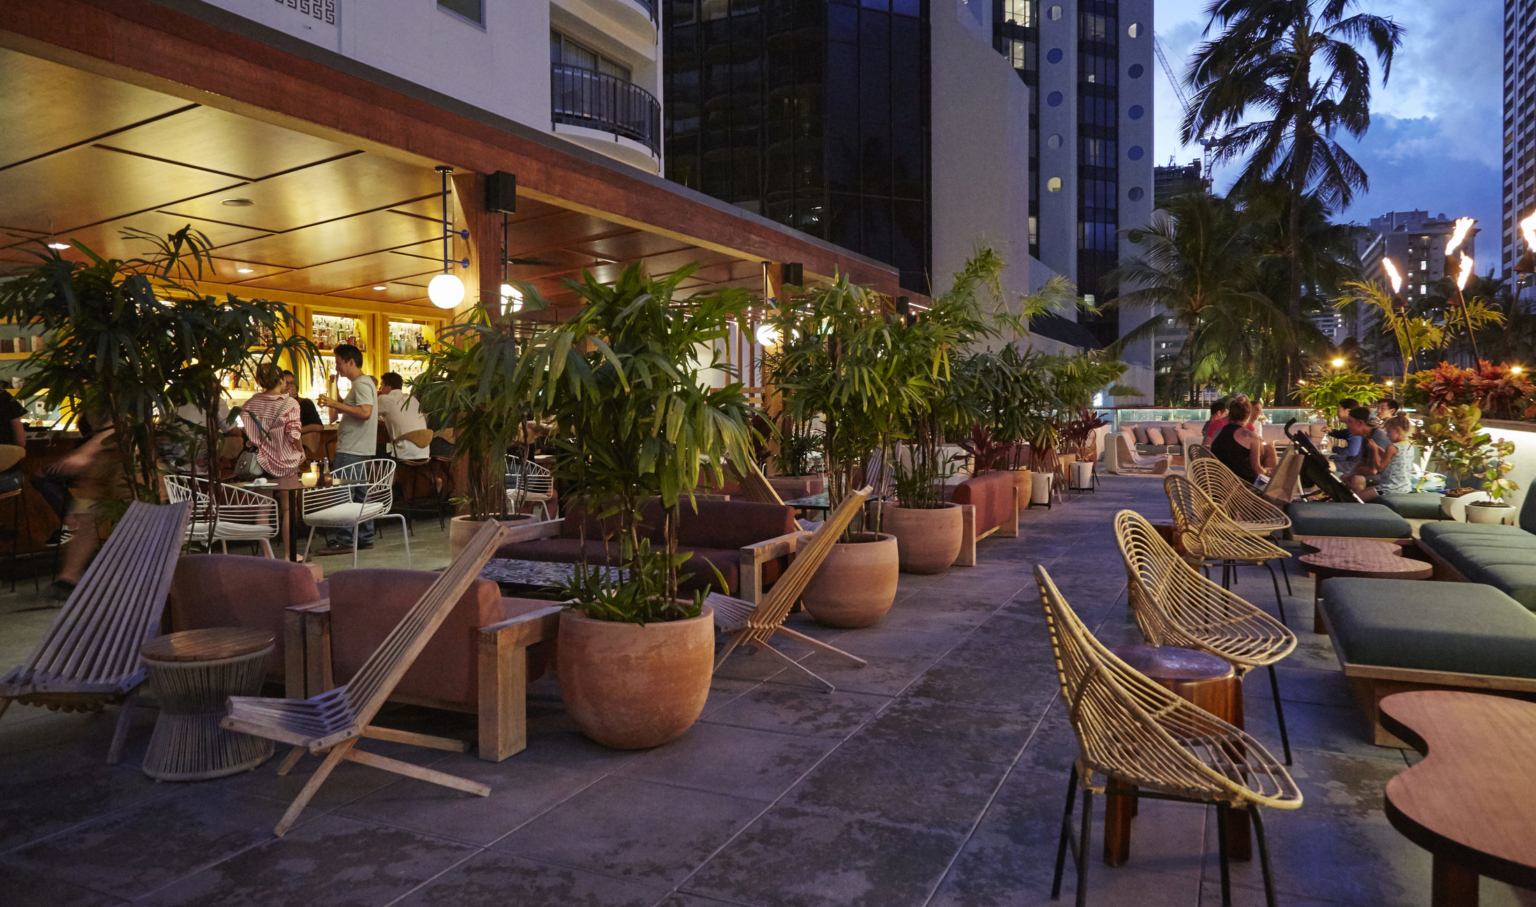 Patio seating area lined with potted palms in front of illuminated bar with wood canopy. White building rises behind